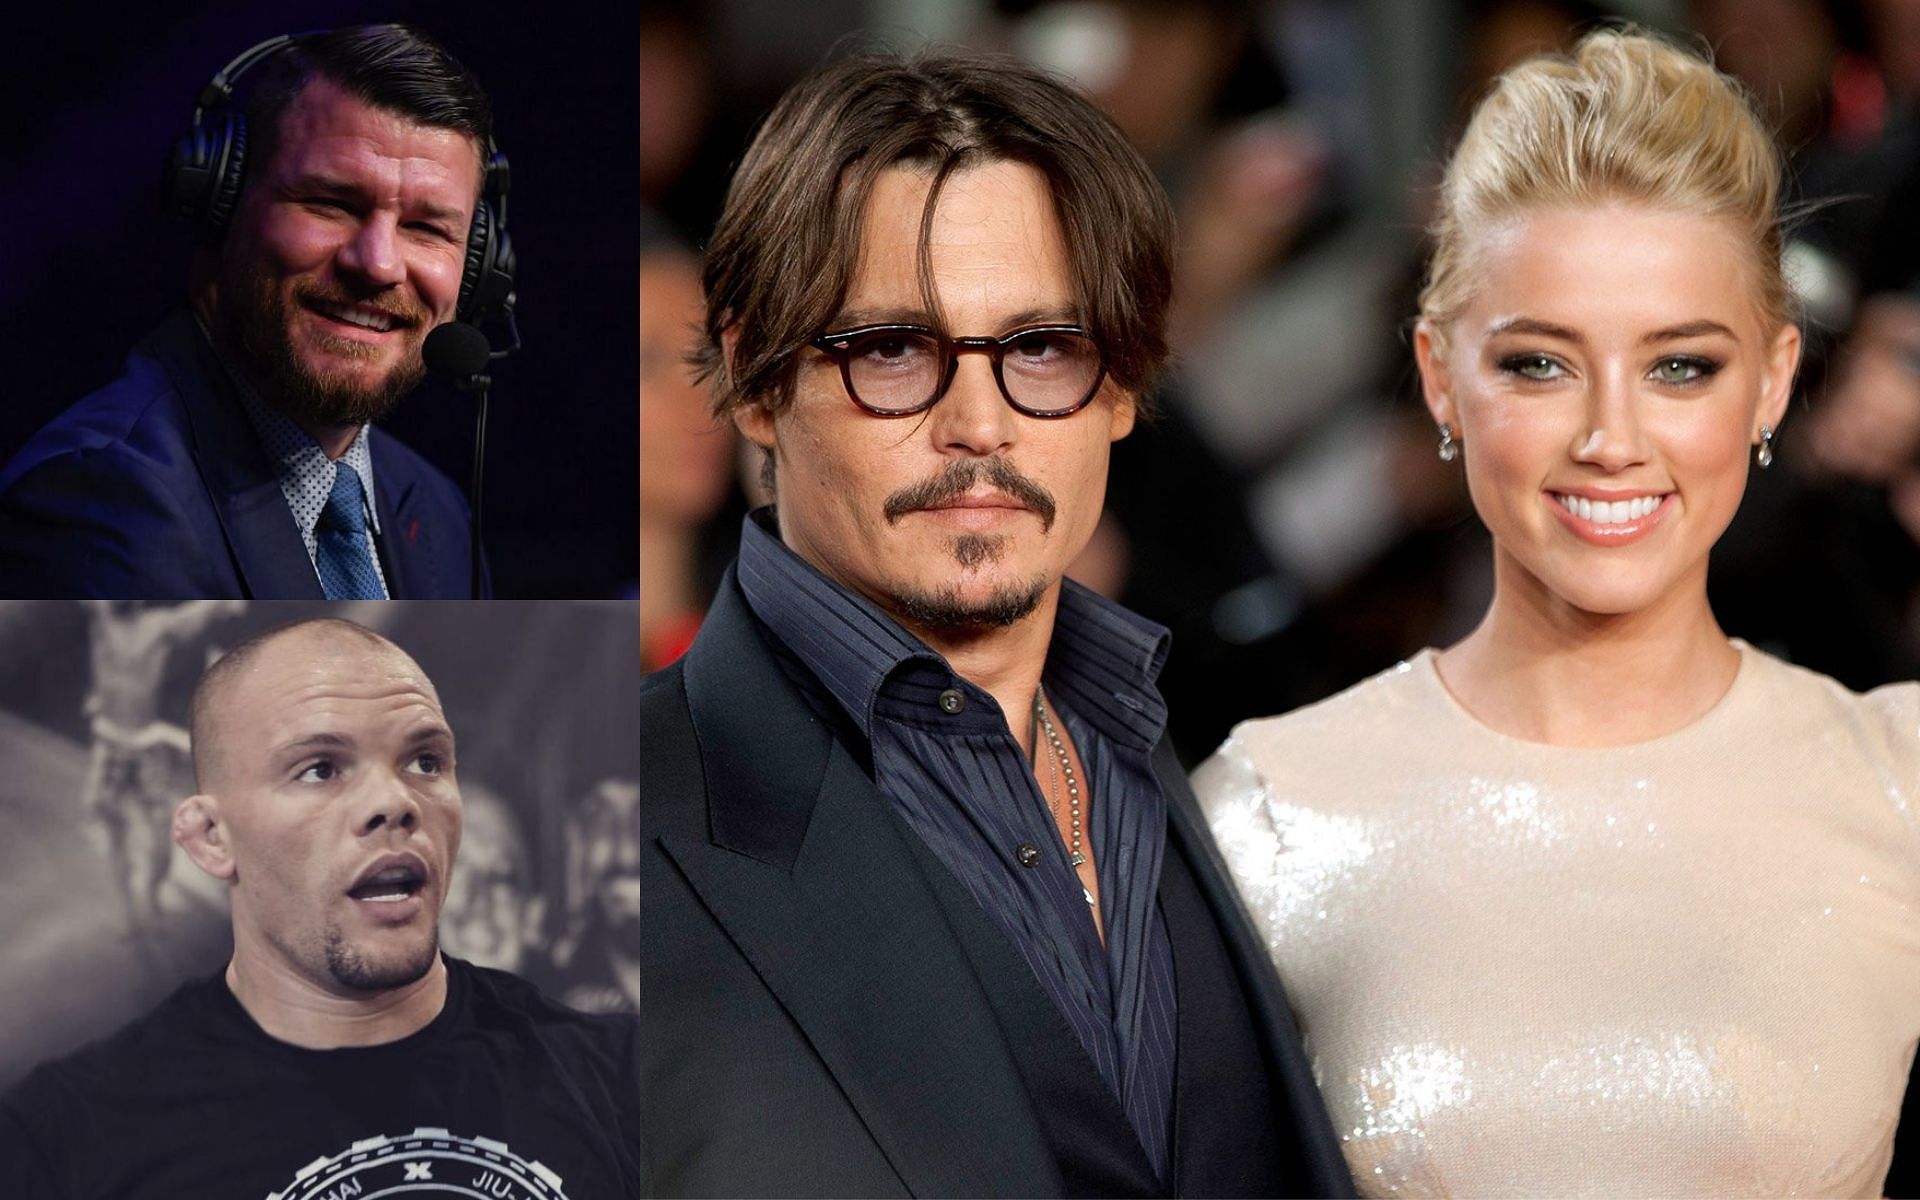 Michael Bisping and Anthony Smith react to the Johnny Depp vs. Amber Heard trial [Photo credit: Culture Crave on Twitter &amp; @lionheartsmith on Instagram]